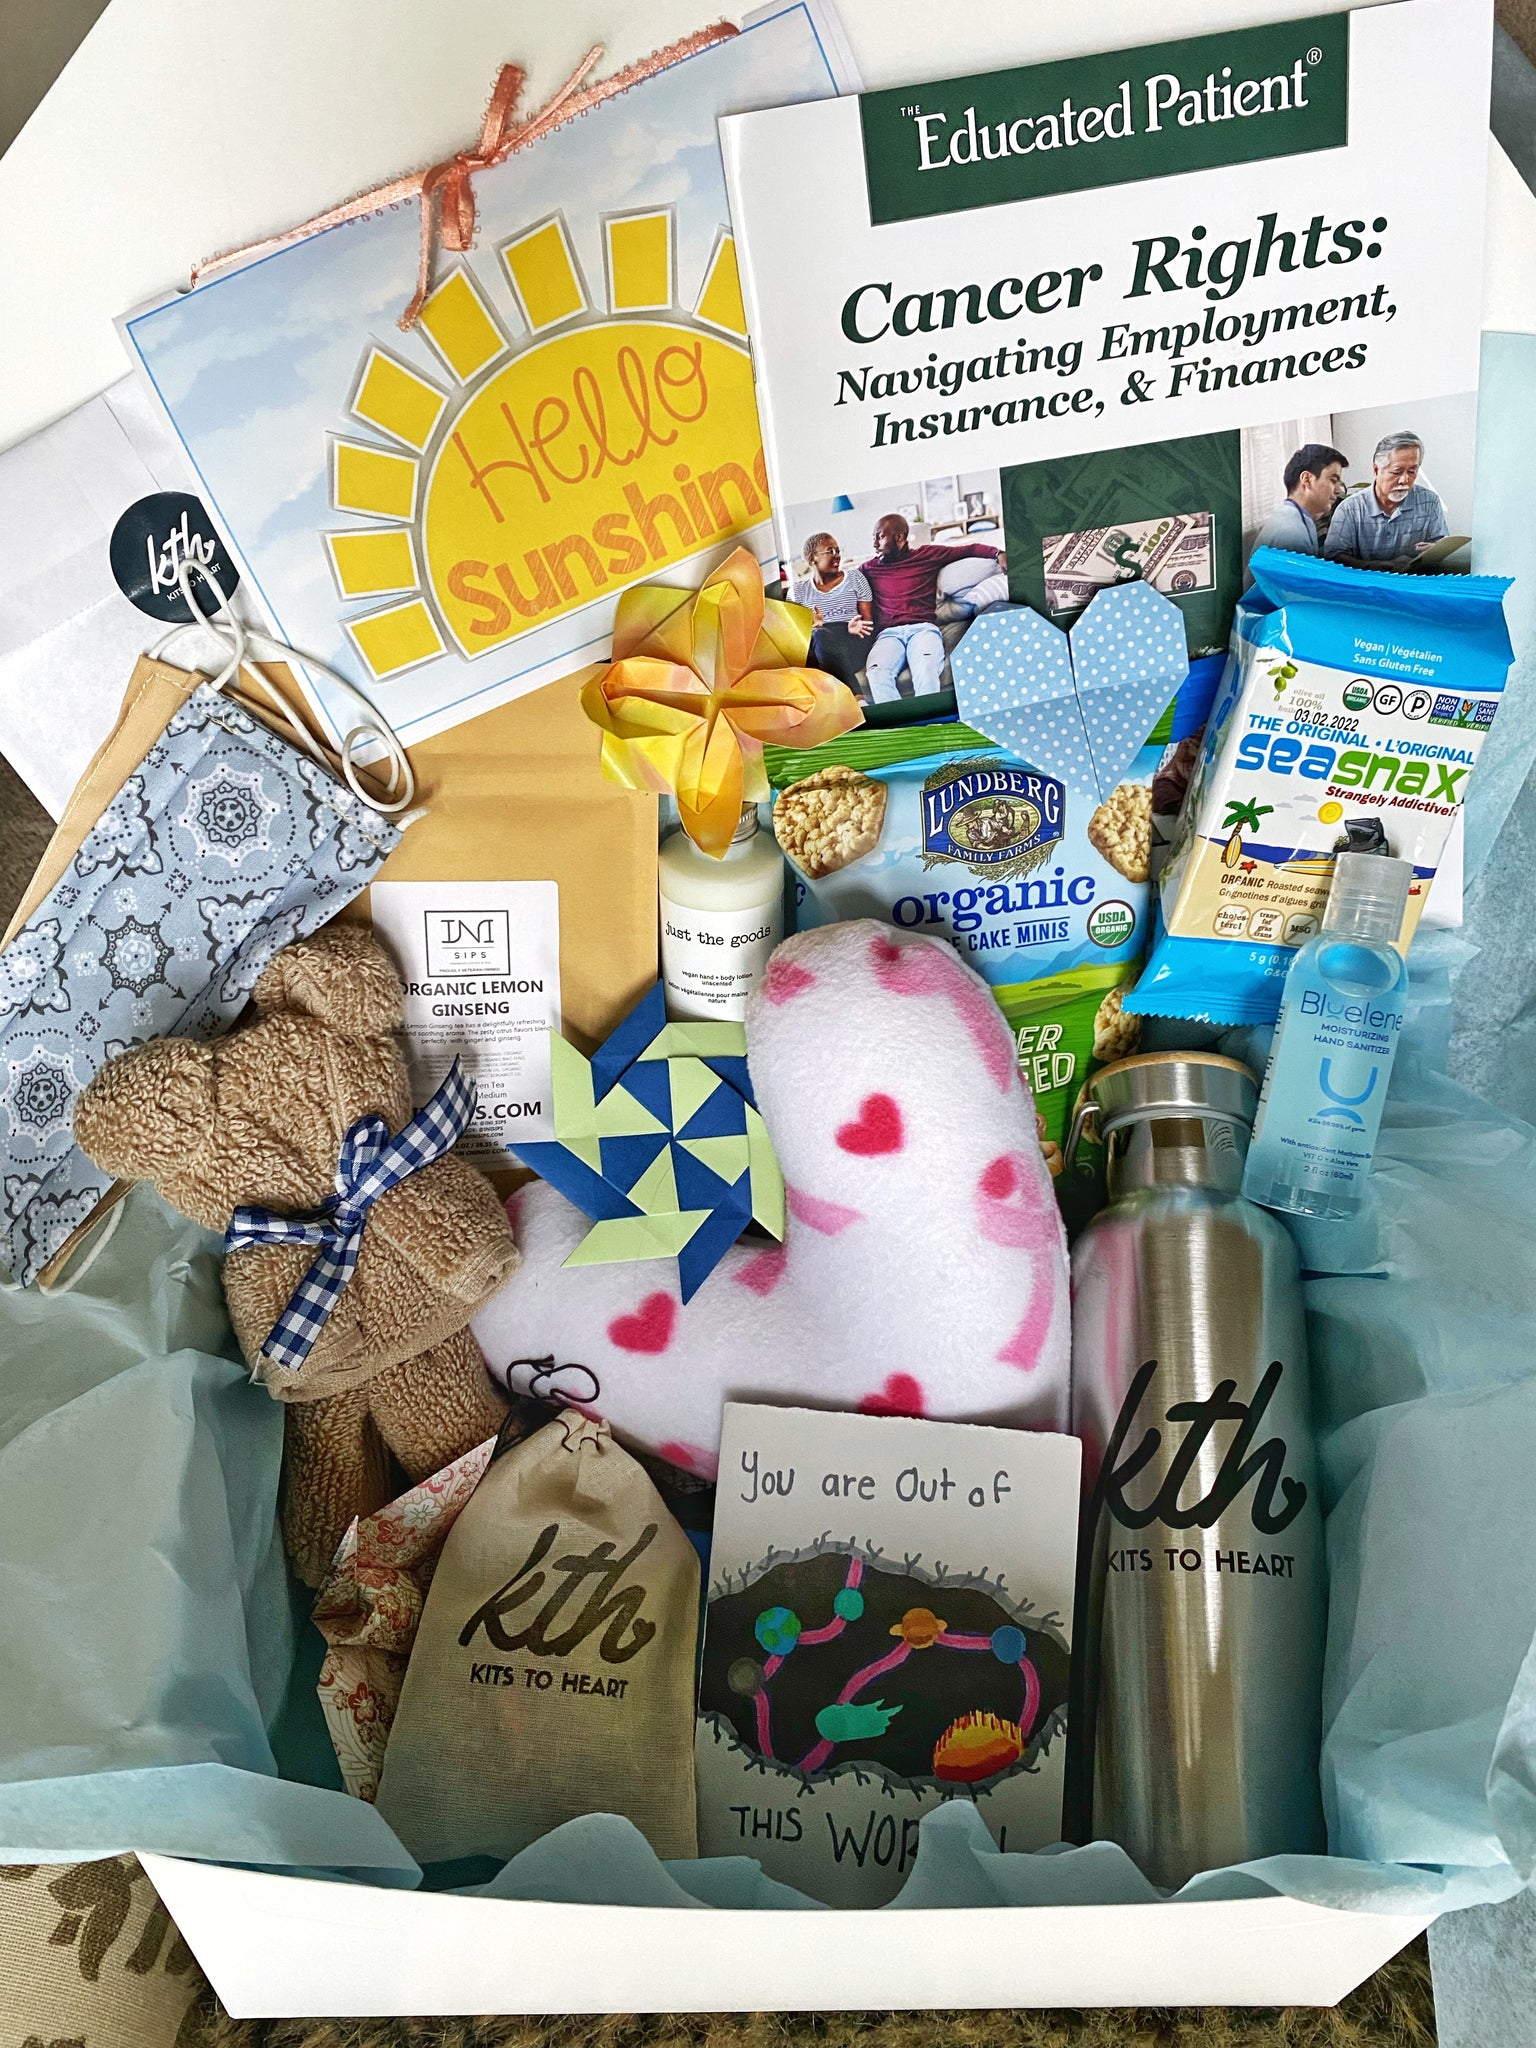 Kaiserin Care Package Is Best Gift for Dog with Cancer, or Cat!